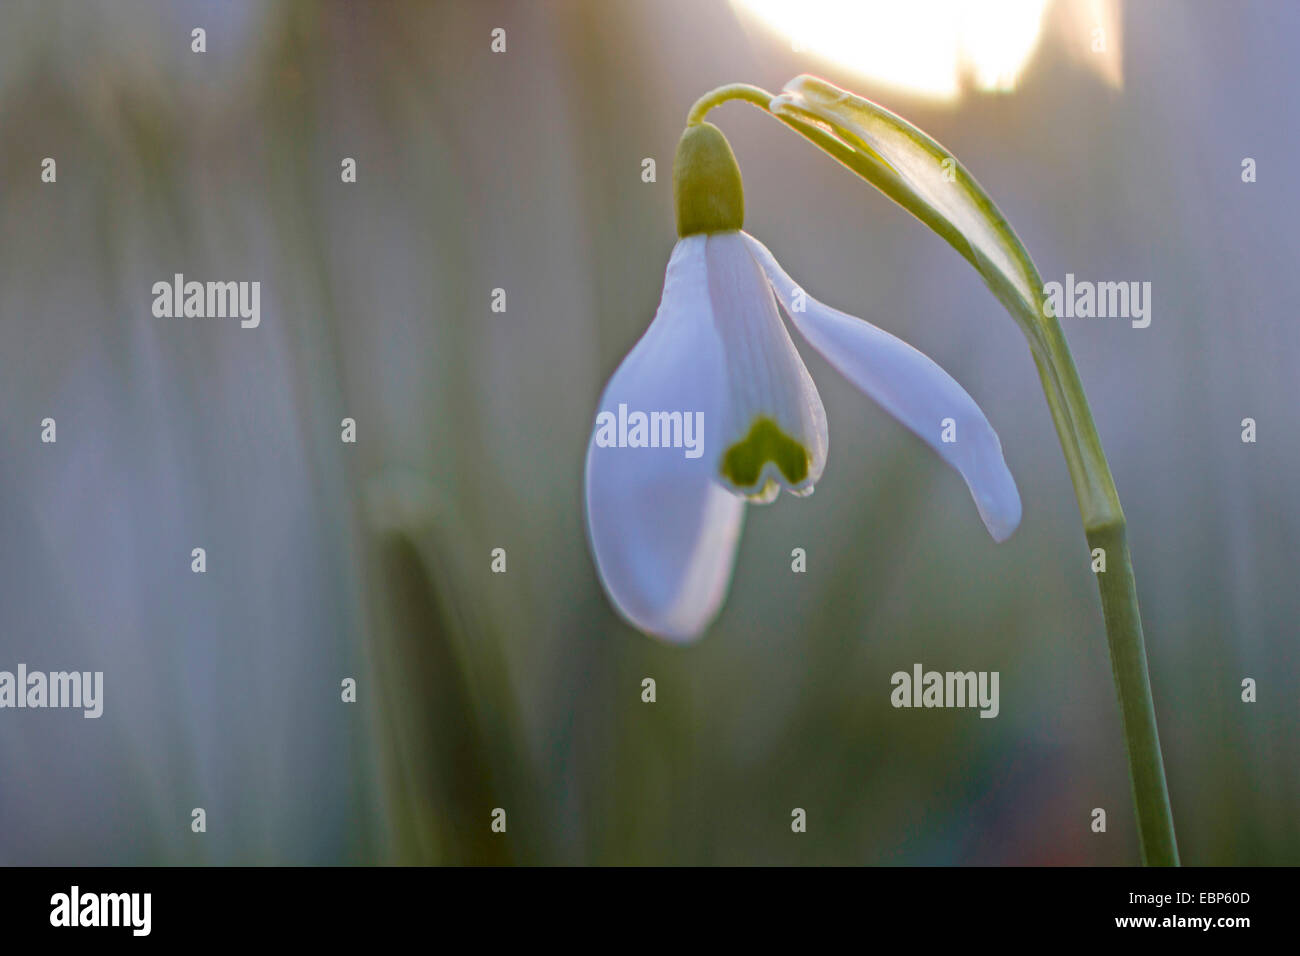 common snowdrop (Galanthus nivalis), blooming in backlight, Germany, Saxony Stock Photo